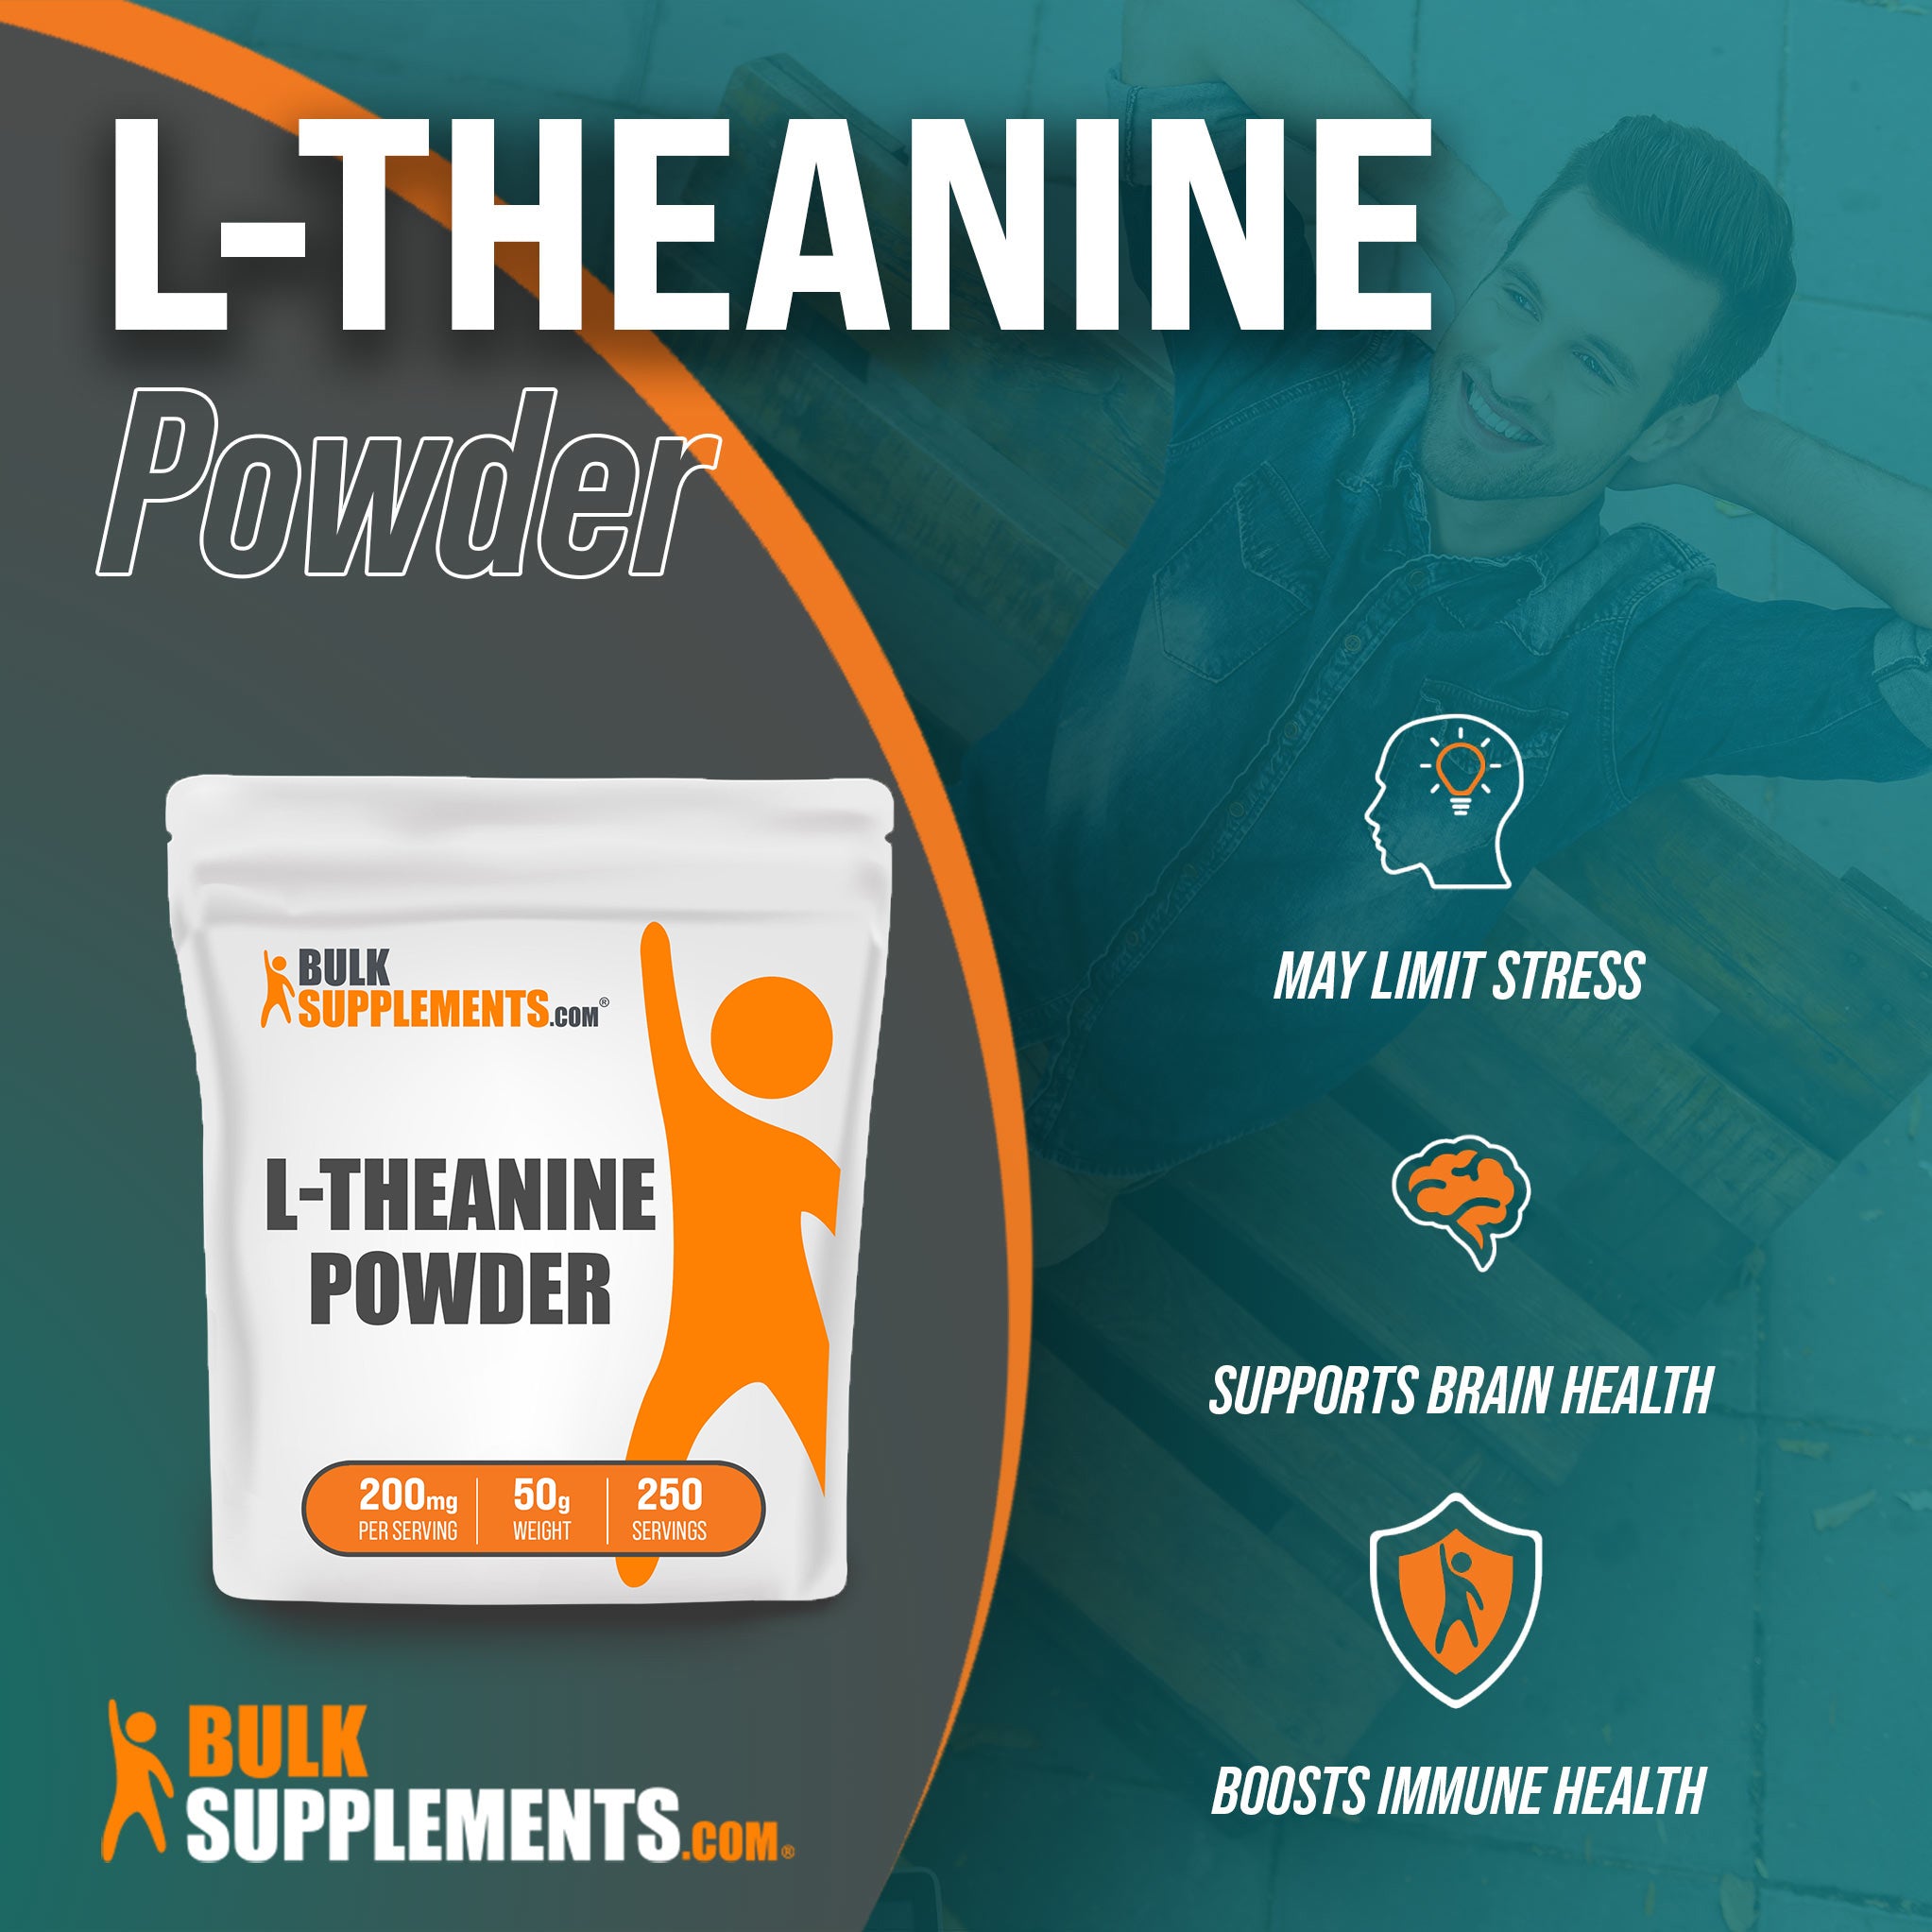 Benefits of L-Theanine: may limit stress, supports brain health, boosts immune health